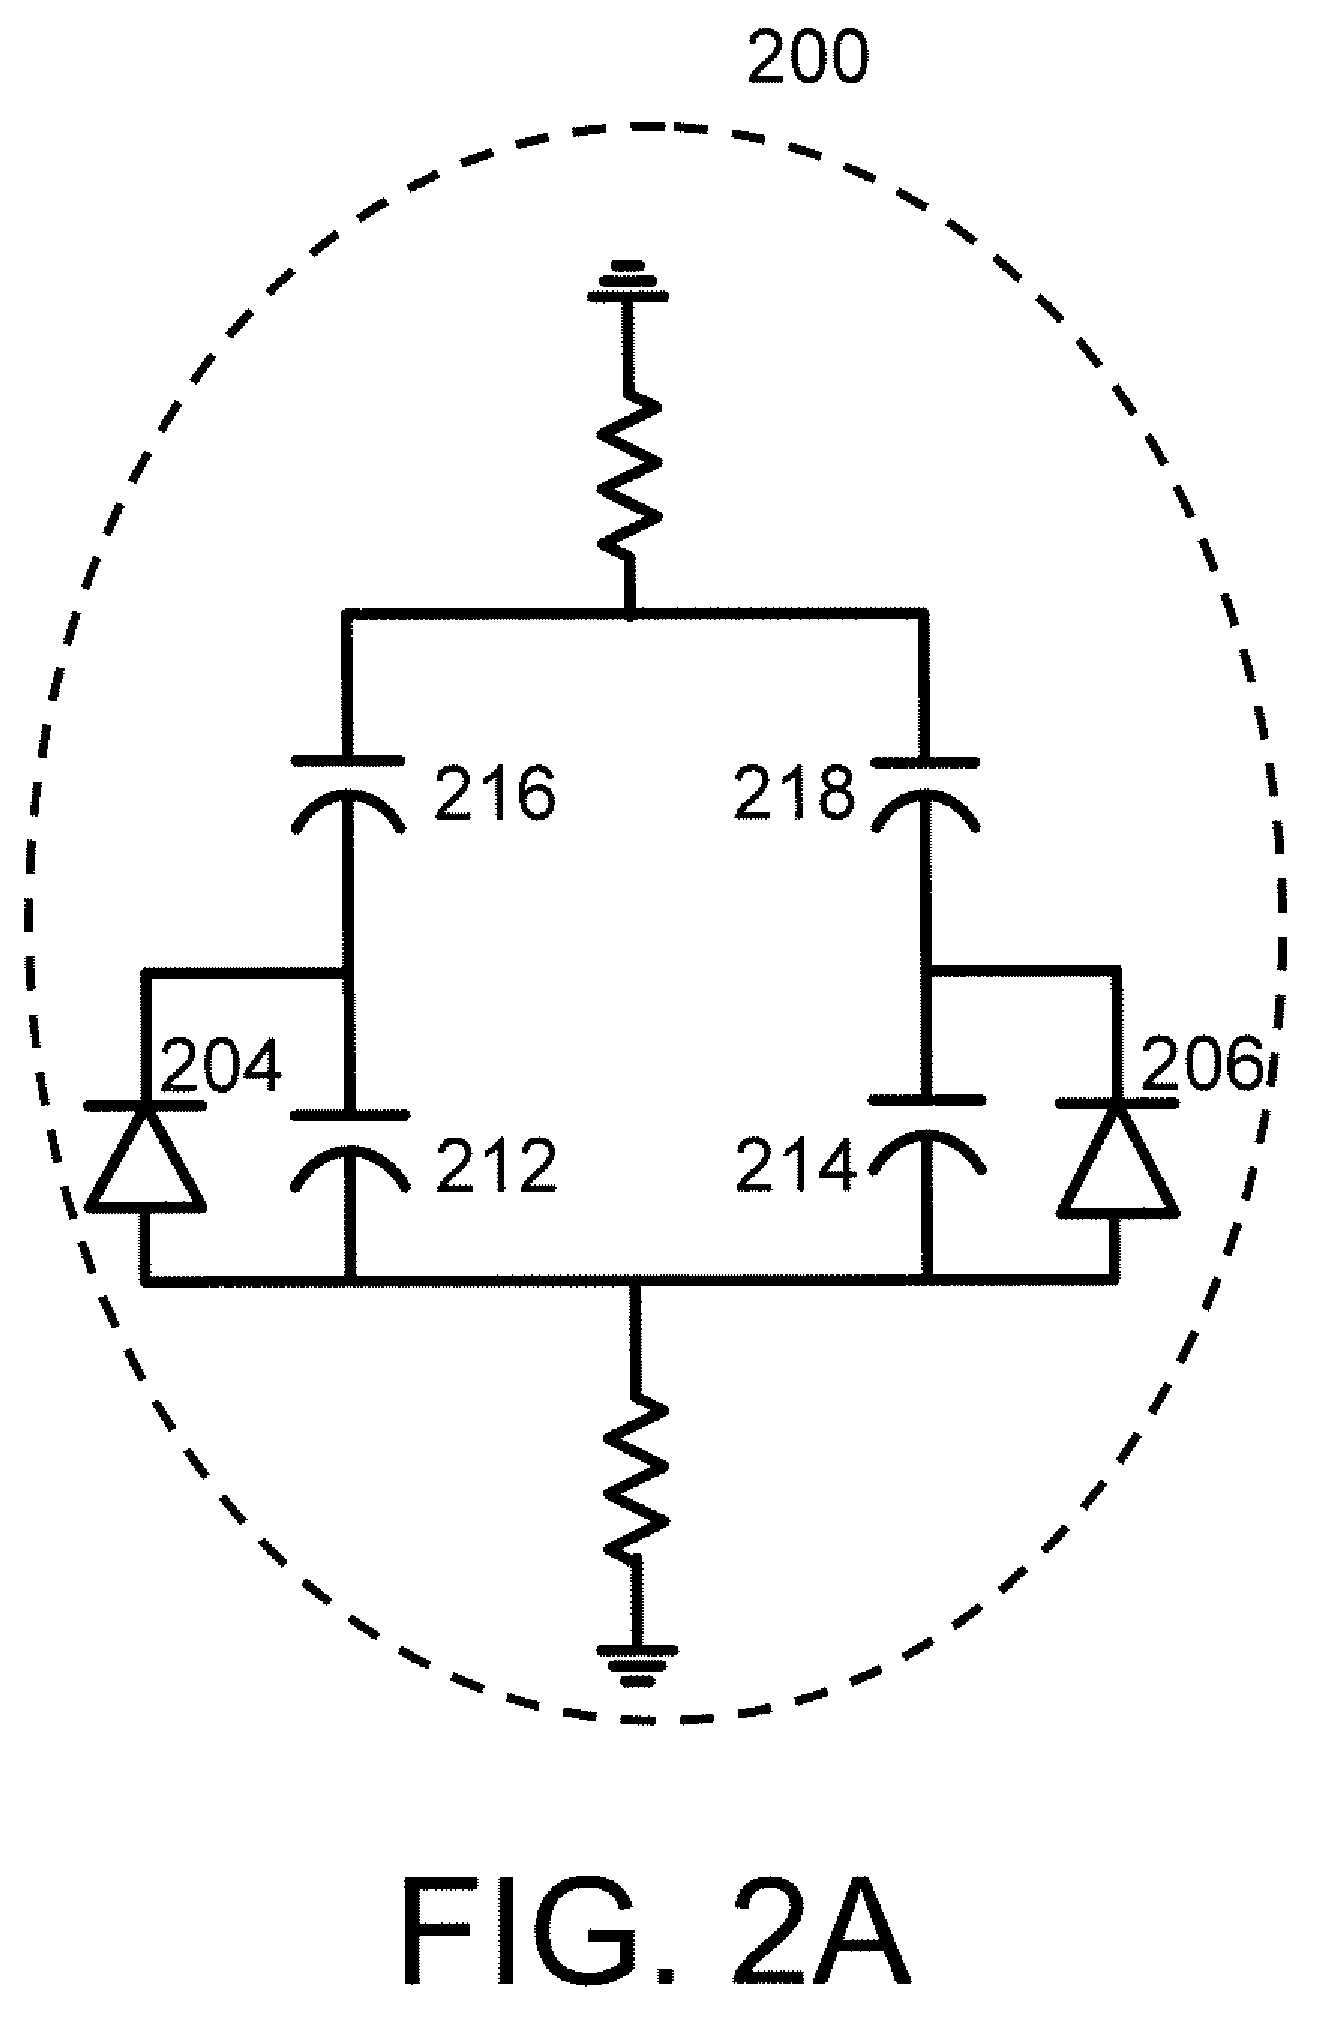 Systems, Methods and Apparatuses for High Power Complementary Metal Oxide Semiconductor (CMOS) Antenna Switches Using Body Switching and External Component in Multi-Stacking Structure